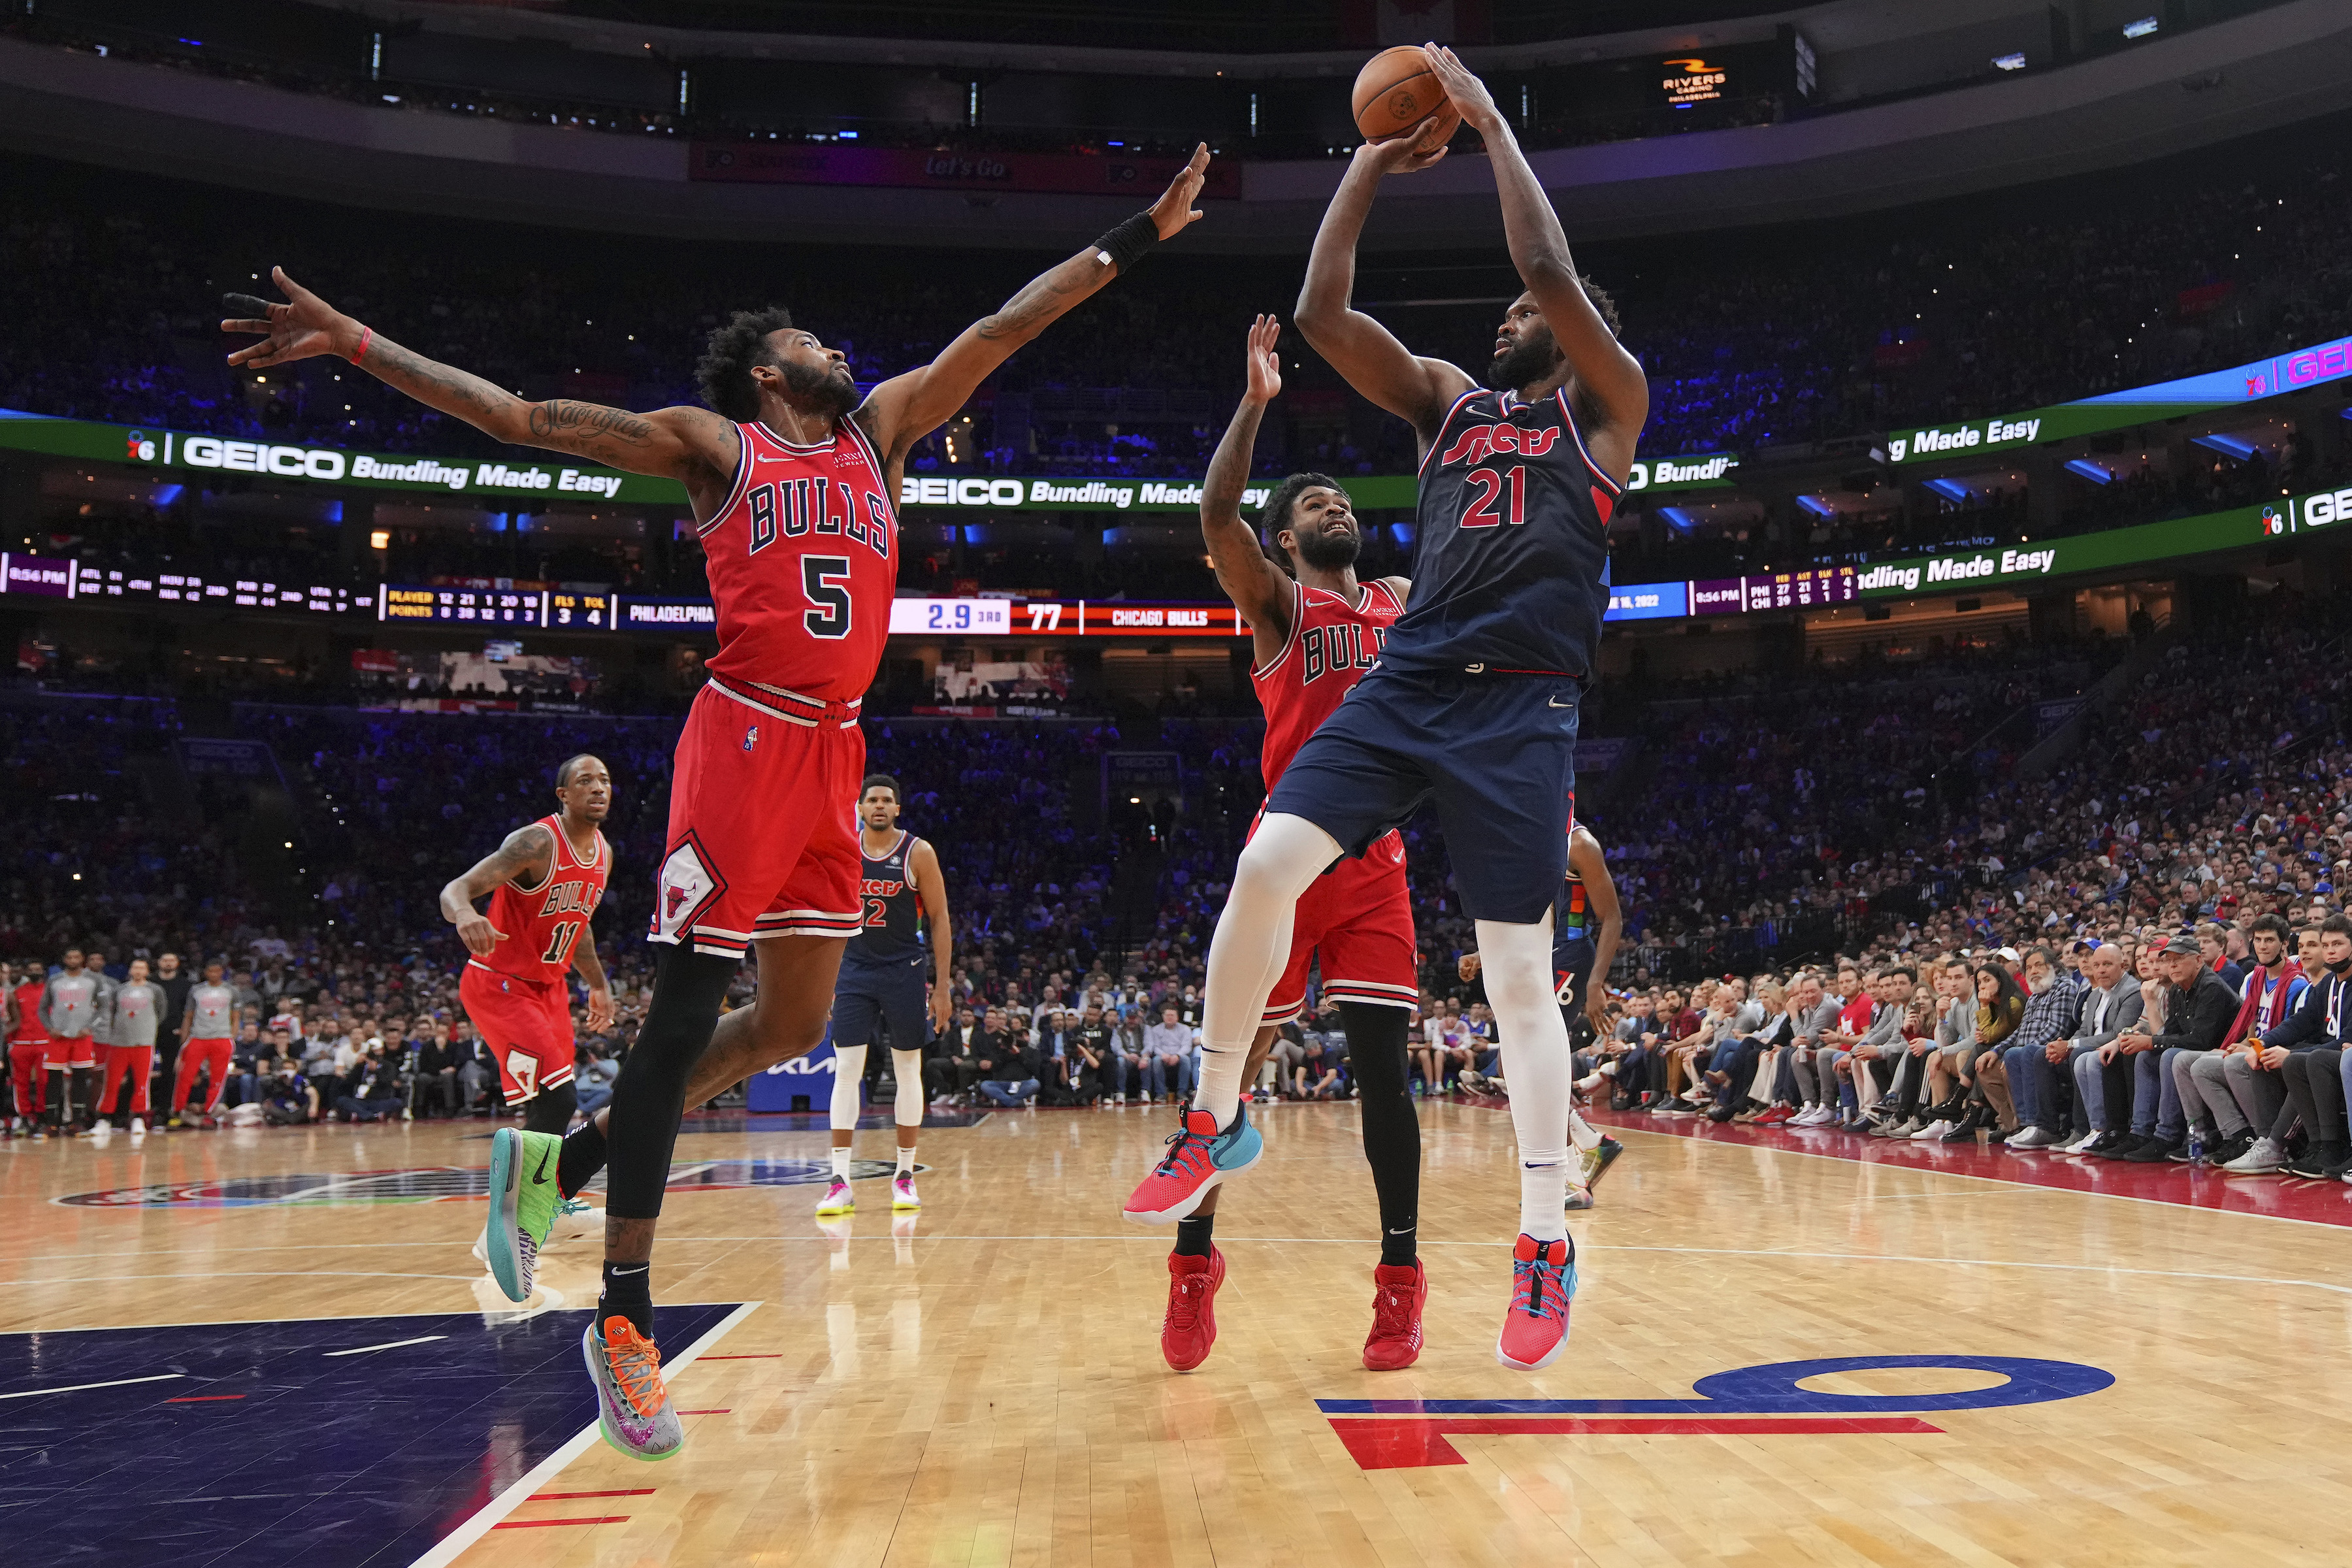 Chicago Bulls forward Derrick Jones Jr. #5 and guard Coby White #0 defend Philadelphia 76ers center Joel Embiid #21 during an NBA game in March 2022